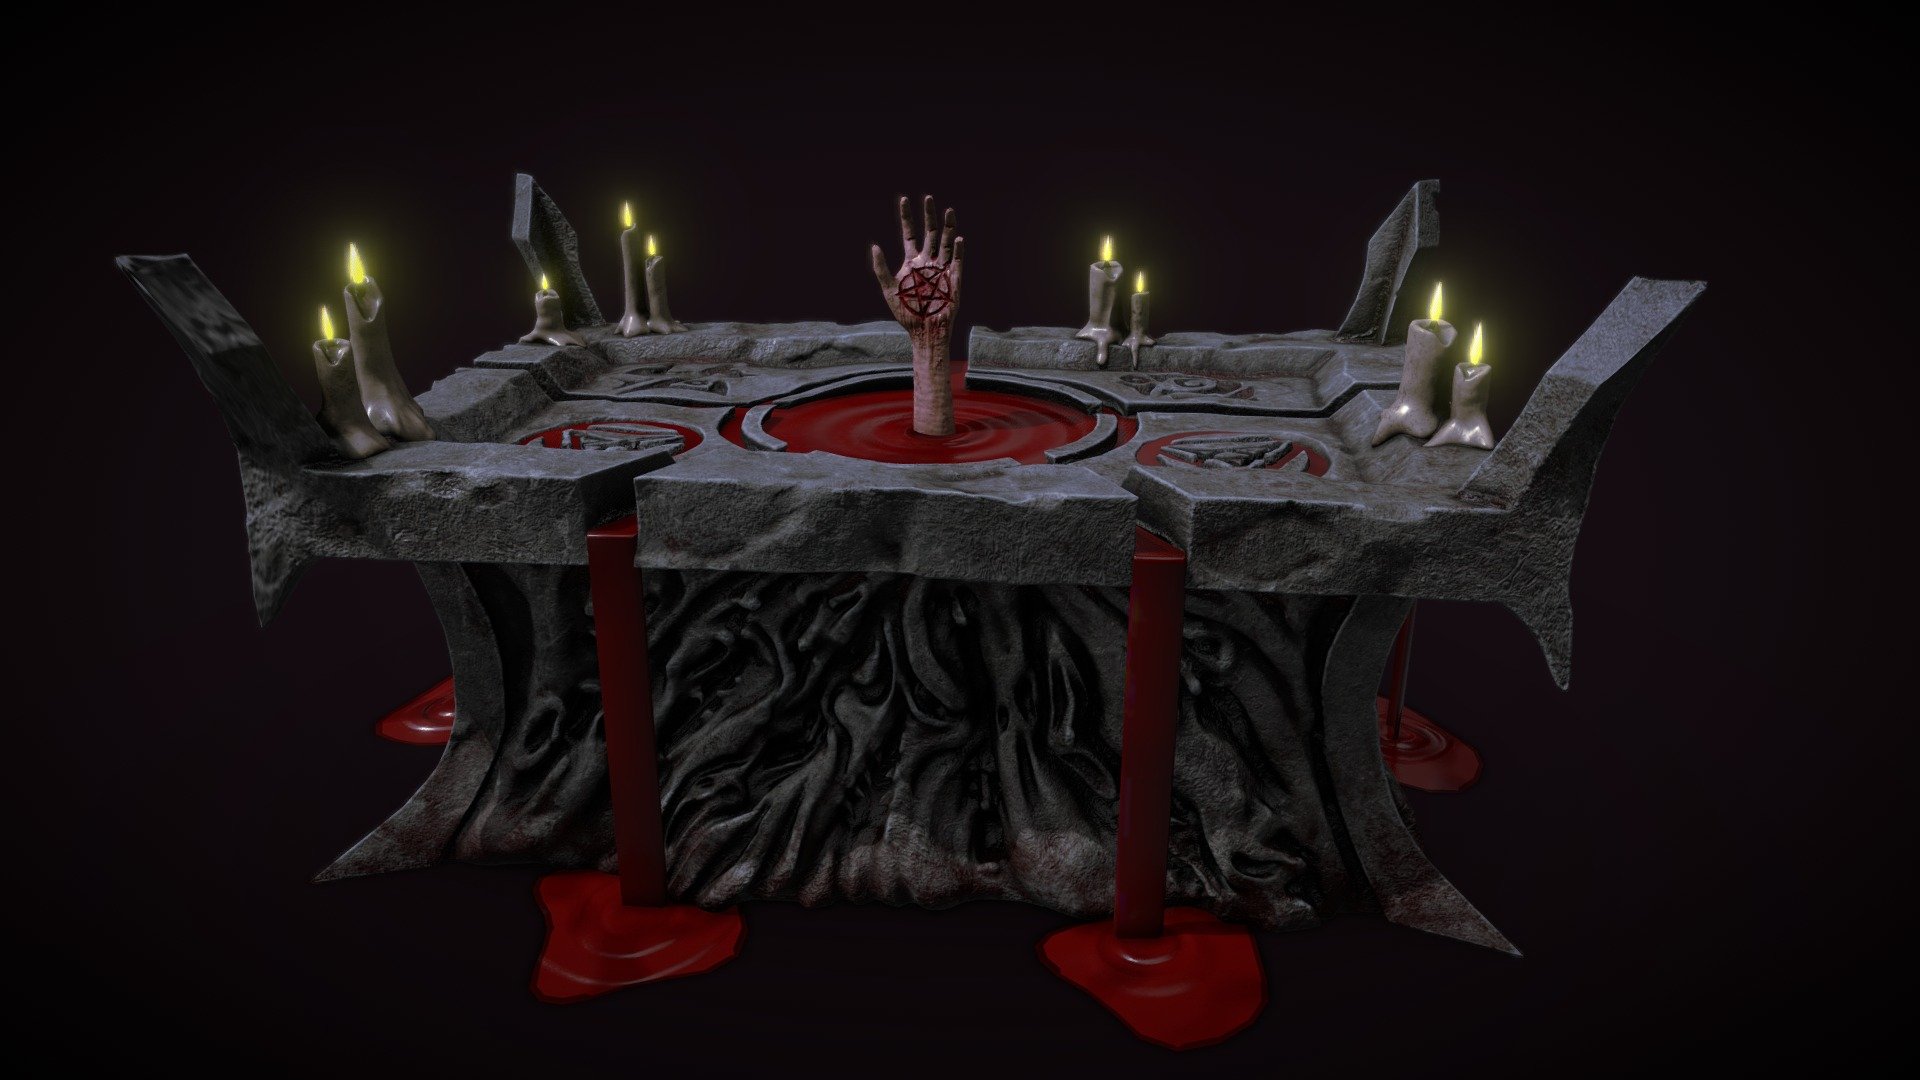 Blood Altar for an environment i'm working on. The environment is DOOM inspired so this altar has a demonic design. The twisted faces of lost souls sacraficed on the altar twist around the base and is lifted up by a demon. Which horrified face is your favorite?! - Blood Altar - 3D model by TLaCroix 3d model